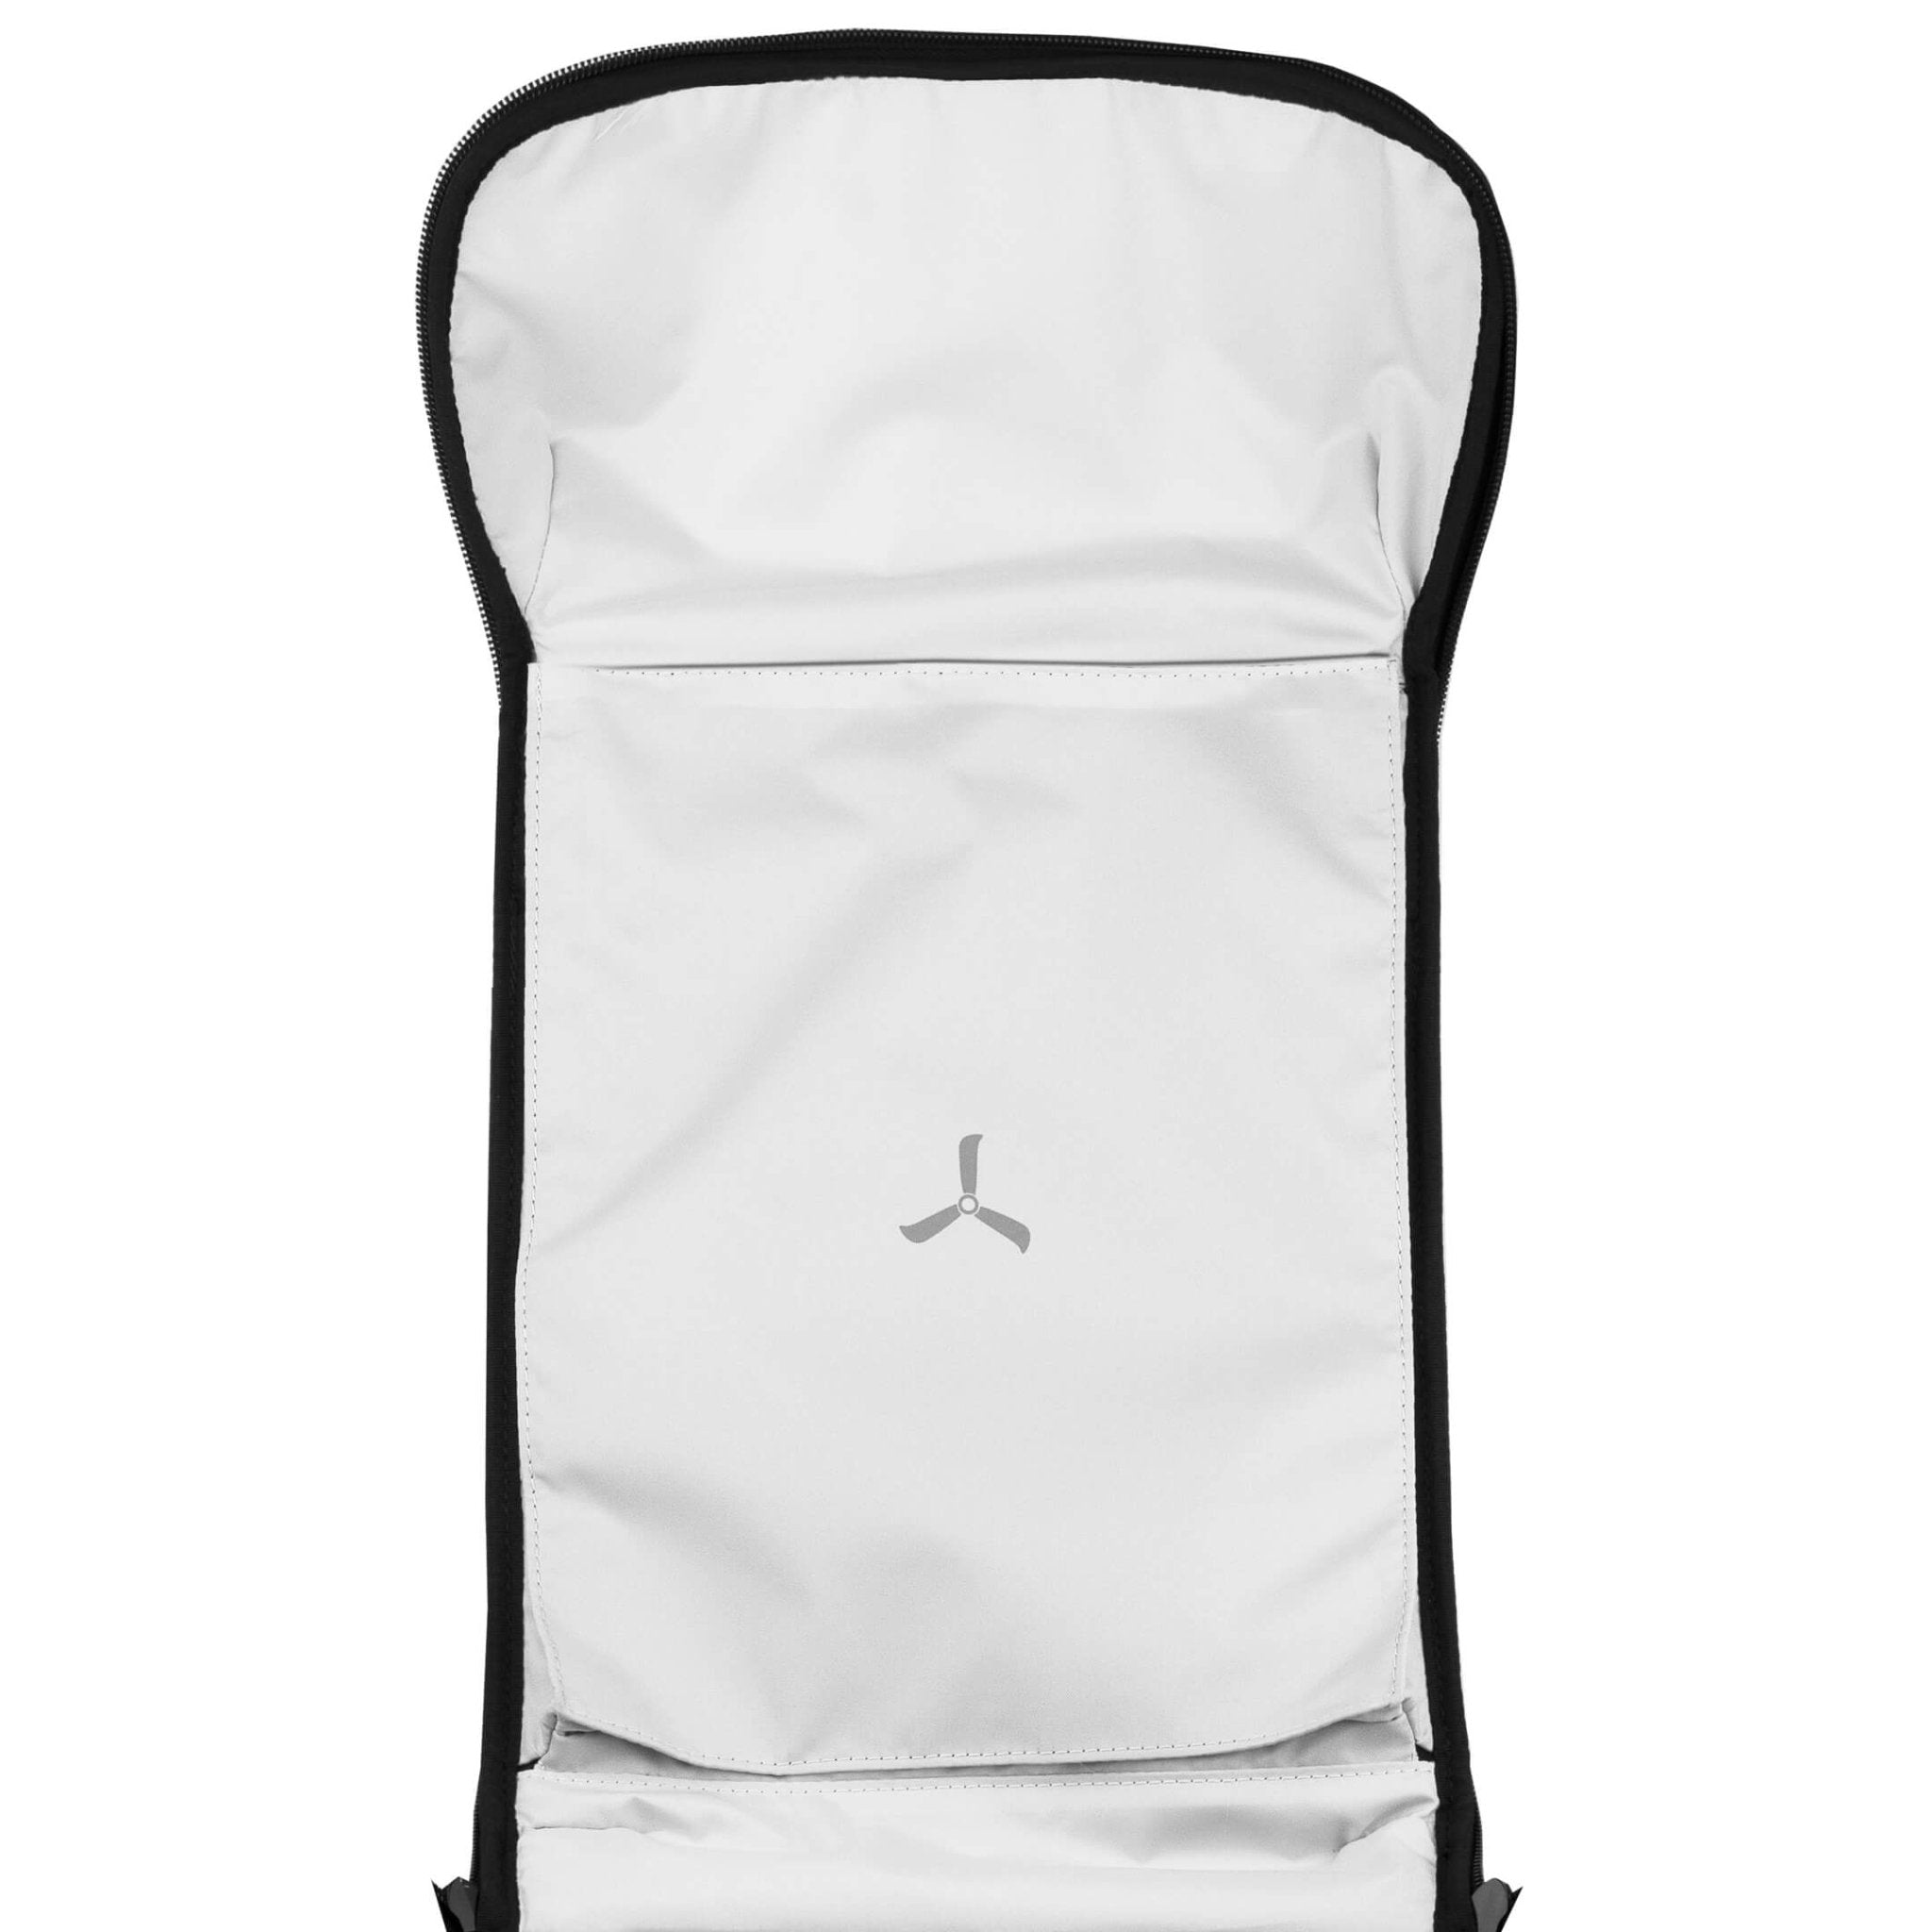 Torvol Urban Backpack - The Ultimate Daily Backpack 6 - Torvol - Drone Authority